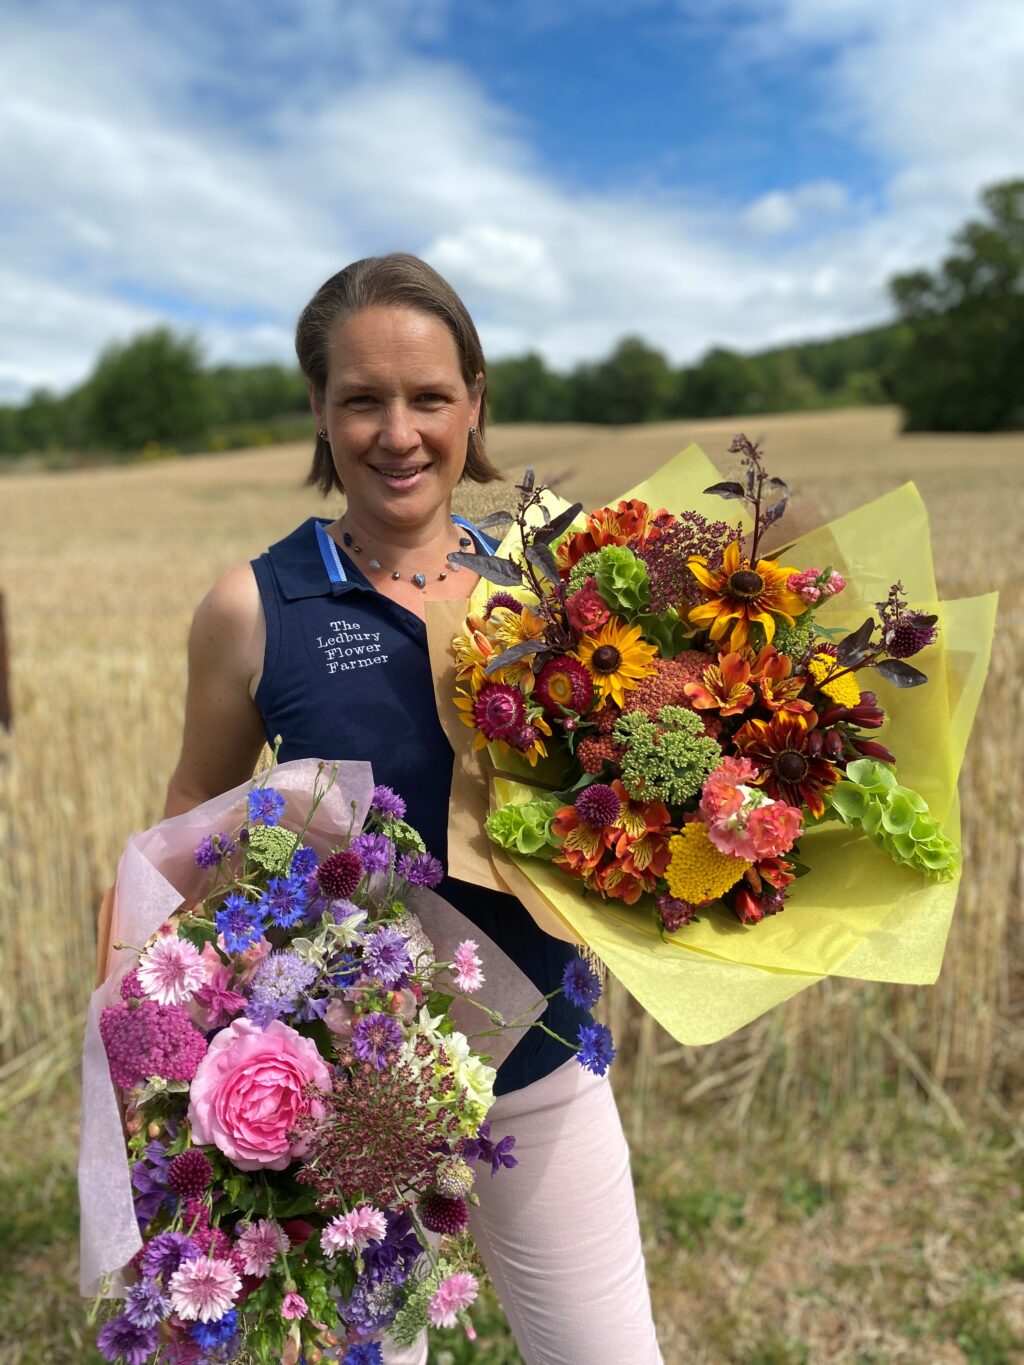 Rozanne Delamore of The Ledbury Flower Farmer holding two stunning bouquets of her flowers against the rural backdrop of her flower farm